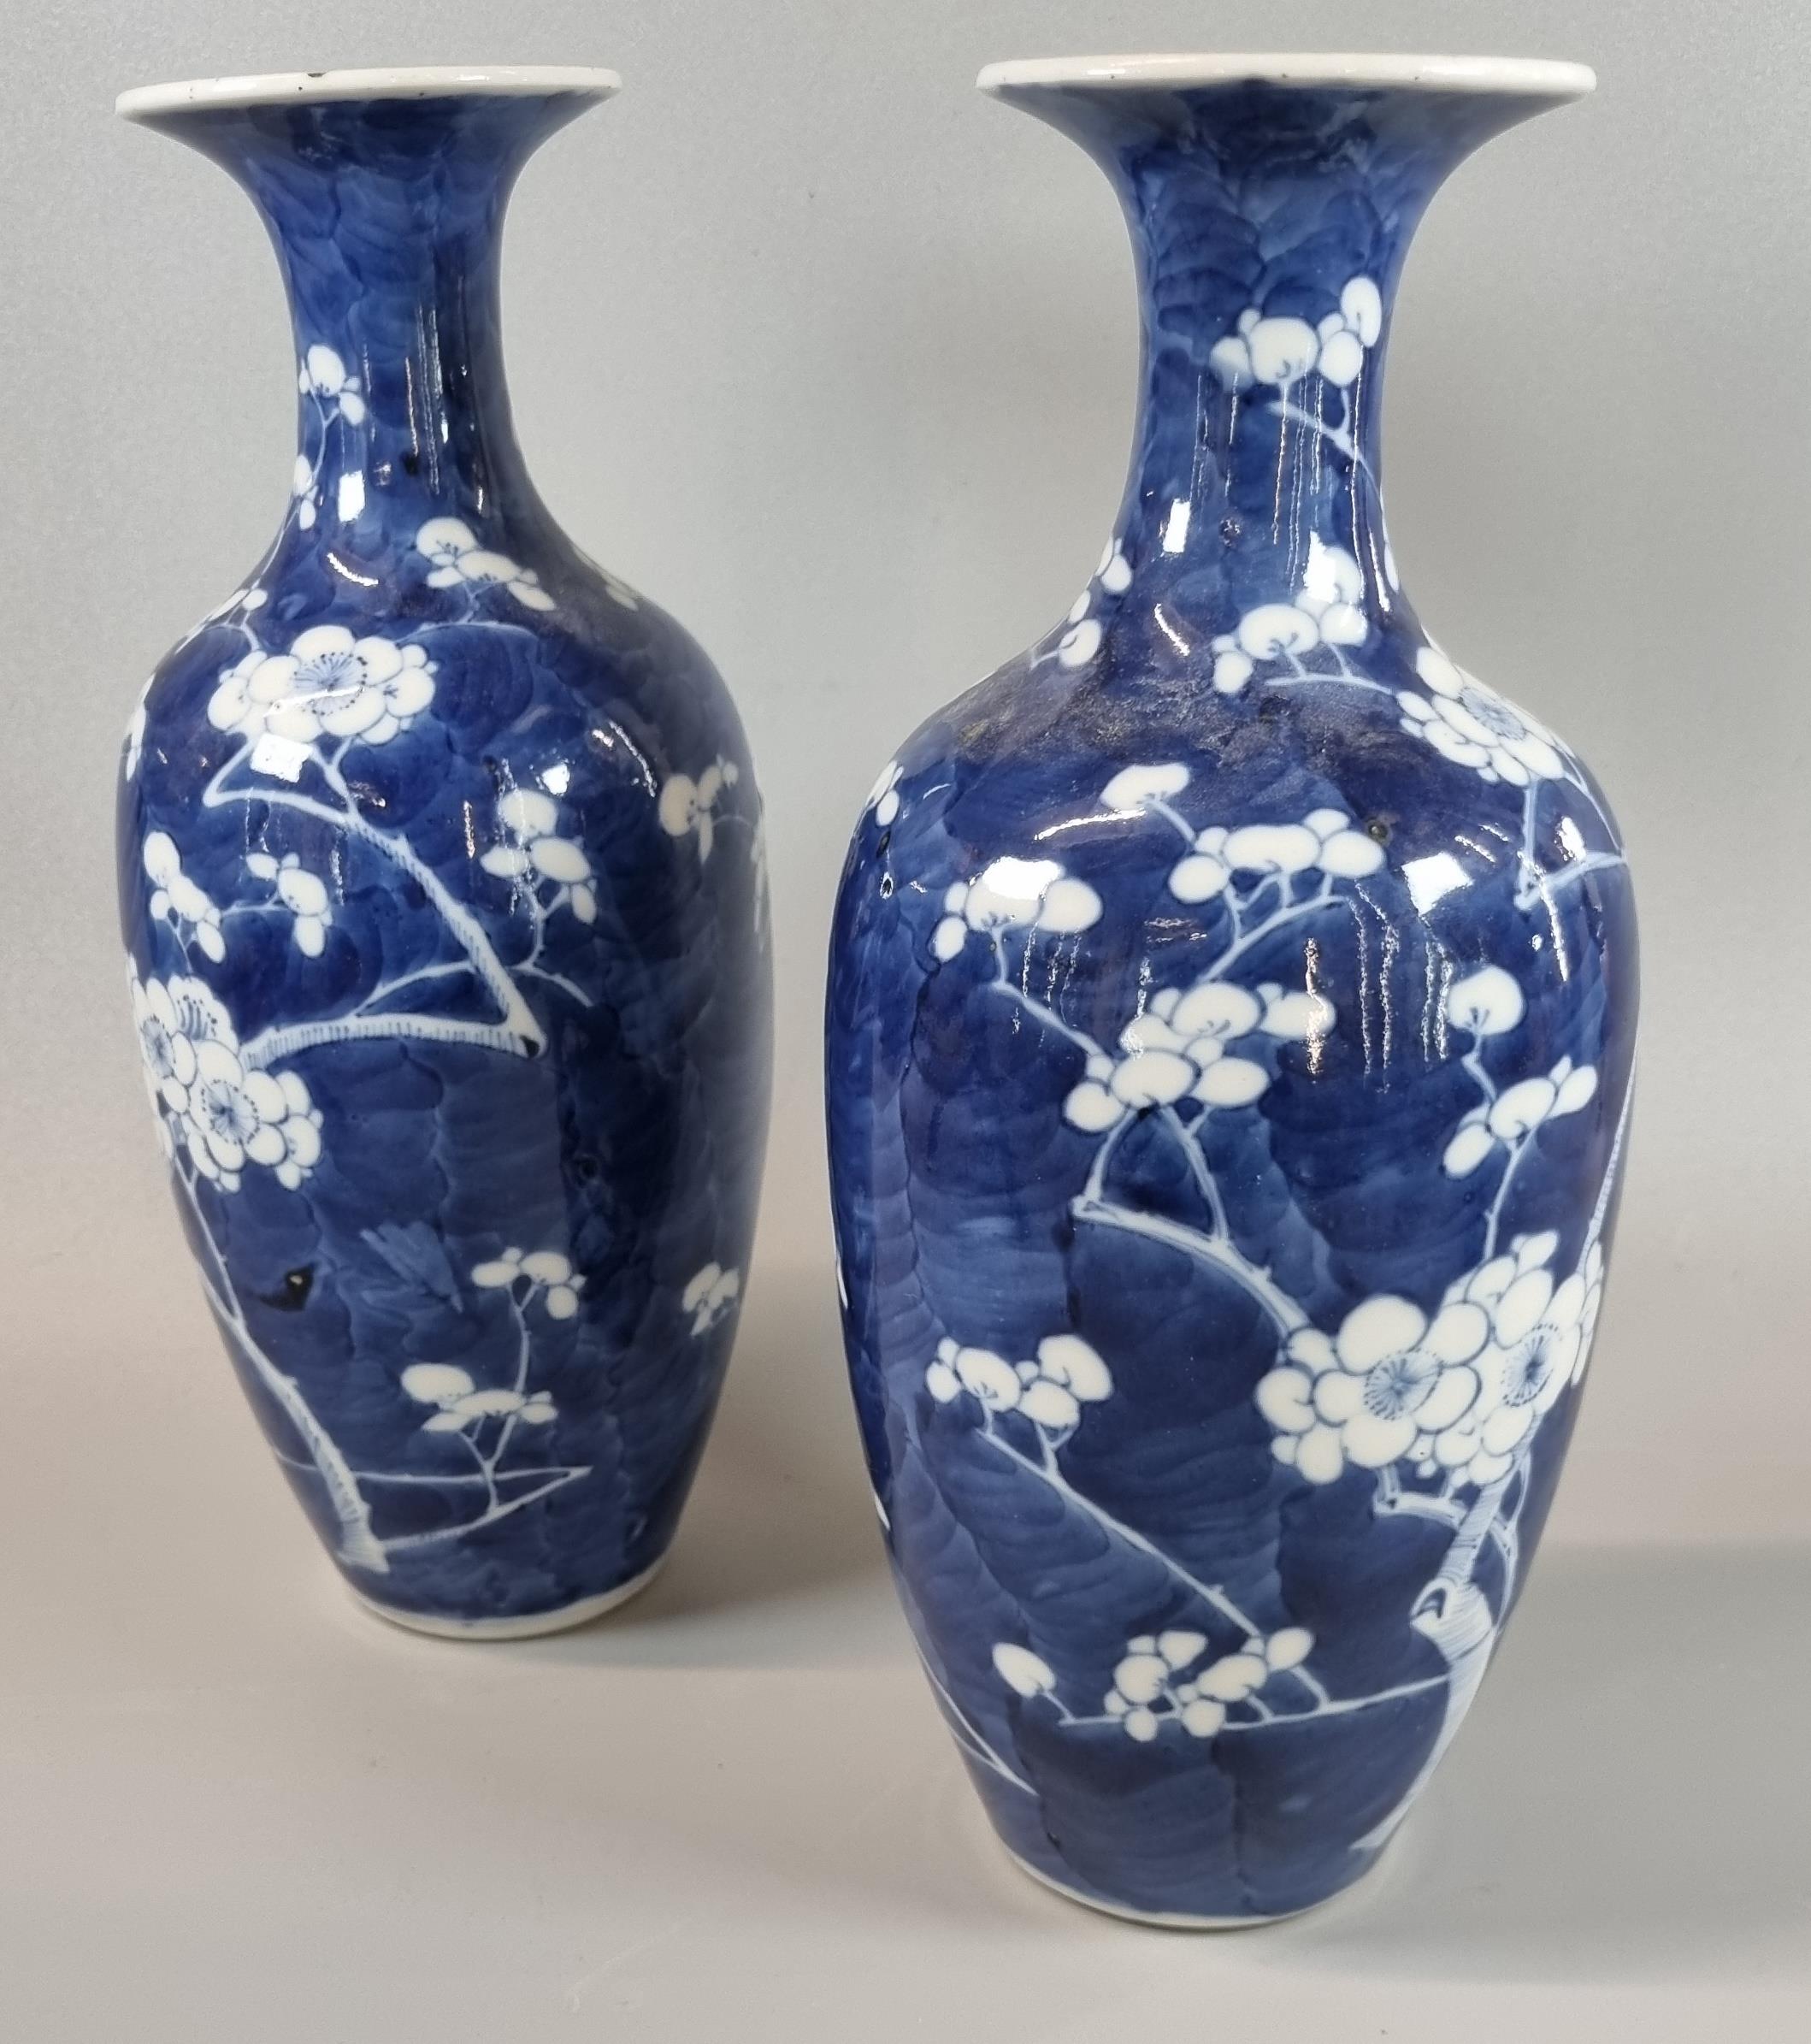 Pair of Chinese export porcelain blue and white baluster vases depicting flower and prunus